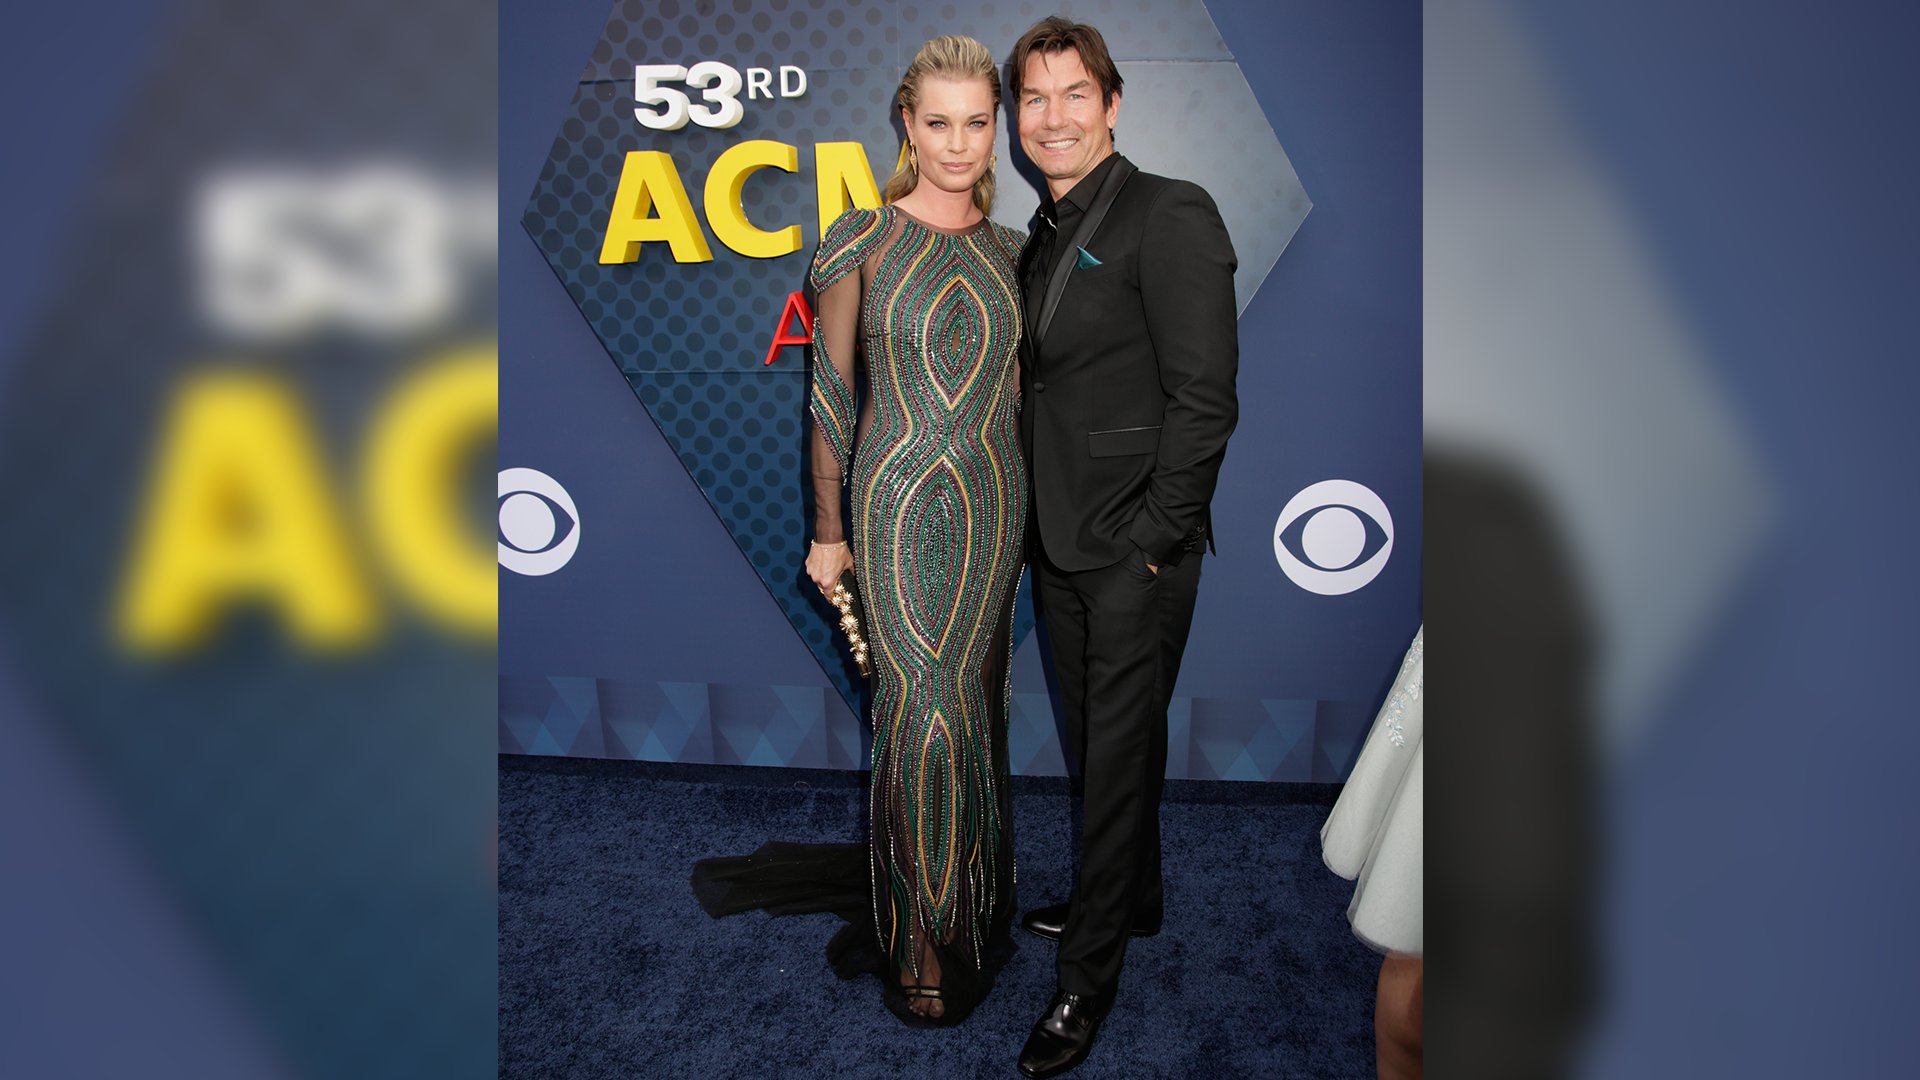 Rebecca Romijn and Jerry O'Connell walk down the ACM red carpet before presenting an award.